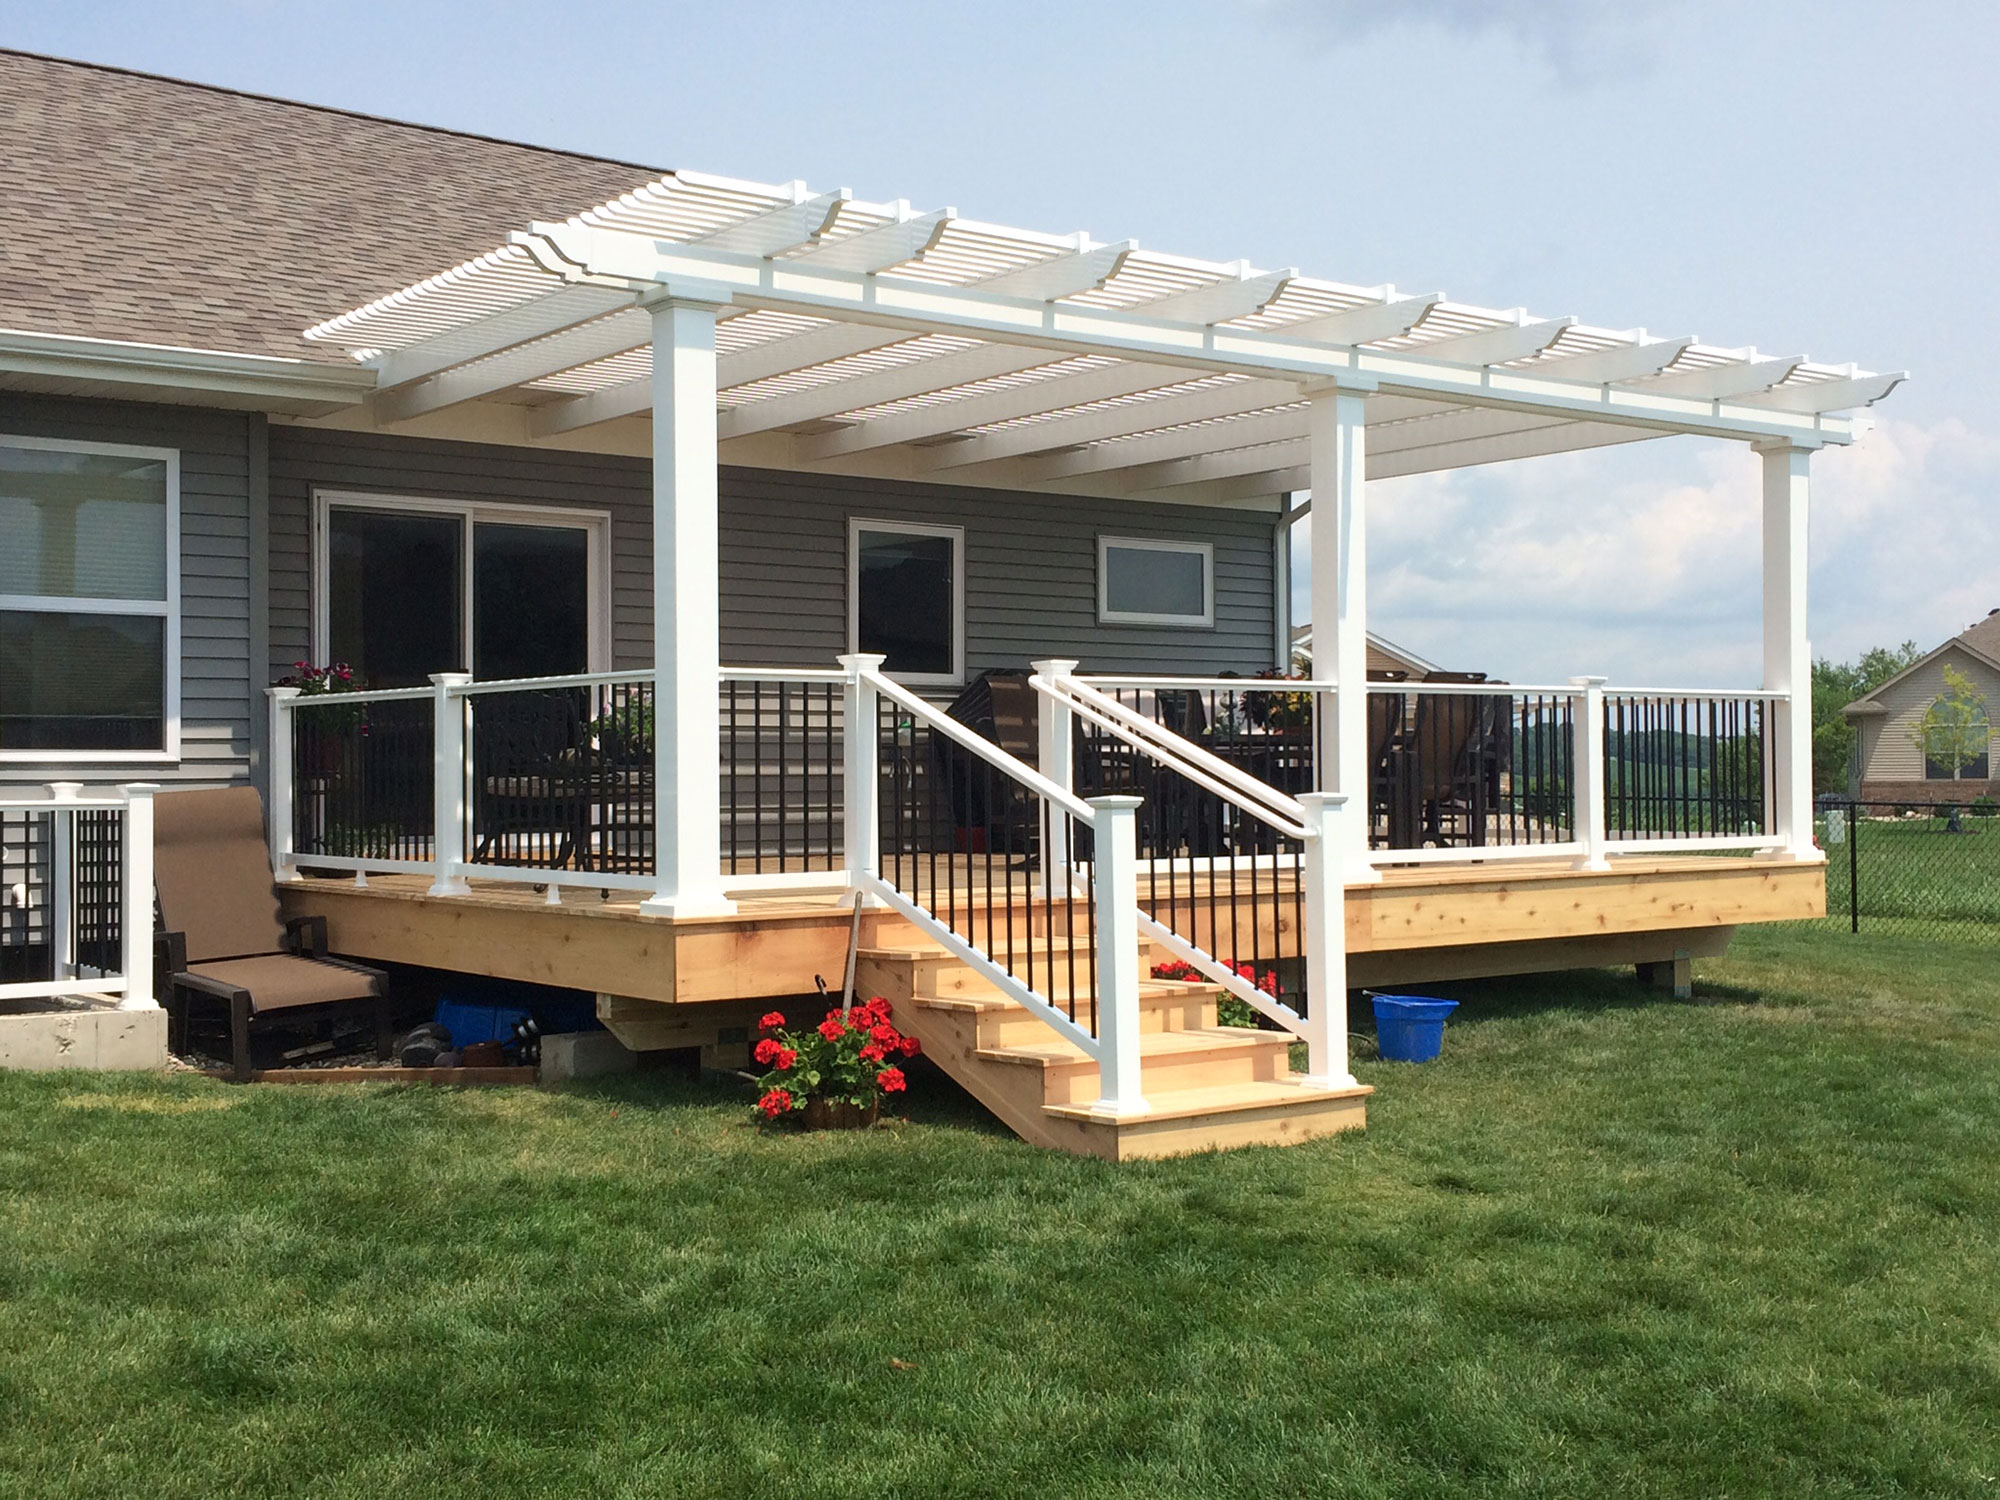 Attached pergola with white siding. There are steps that lead up from the yard to the covered deck area.